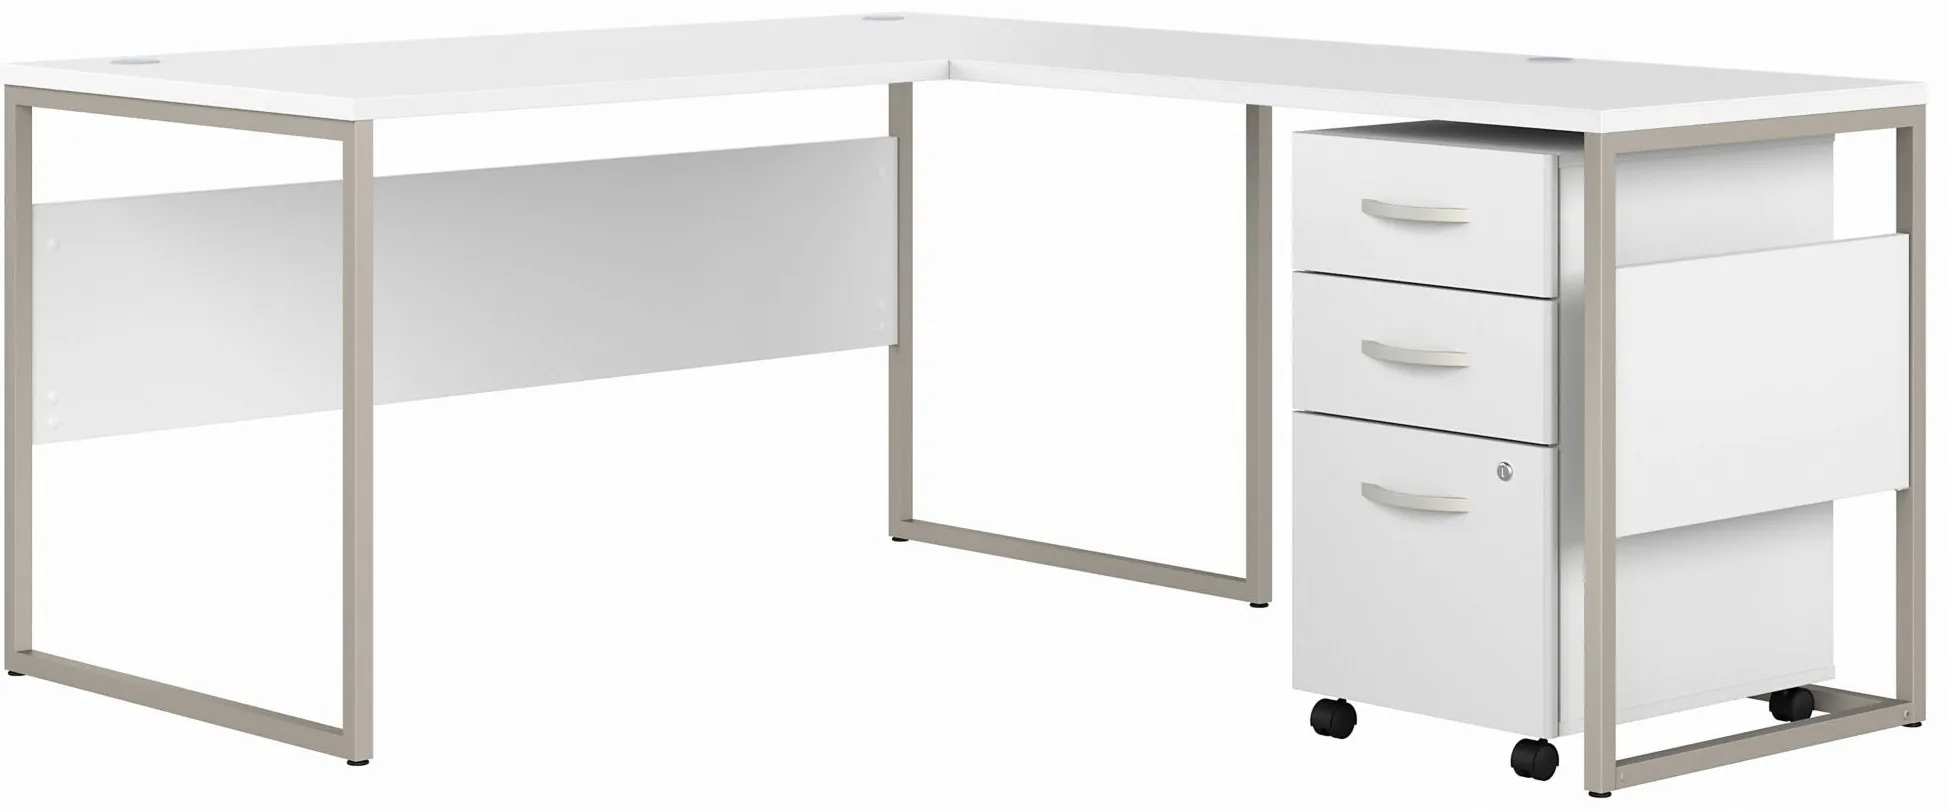 Steinbeck L-Shaped Writing Desk w/ File Cabinet in White by Bush Industries